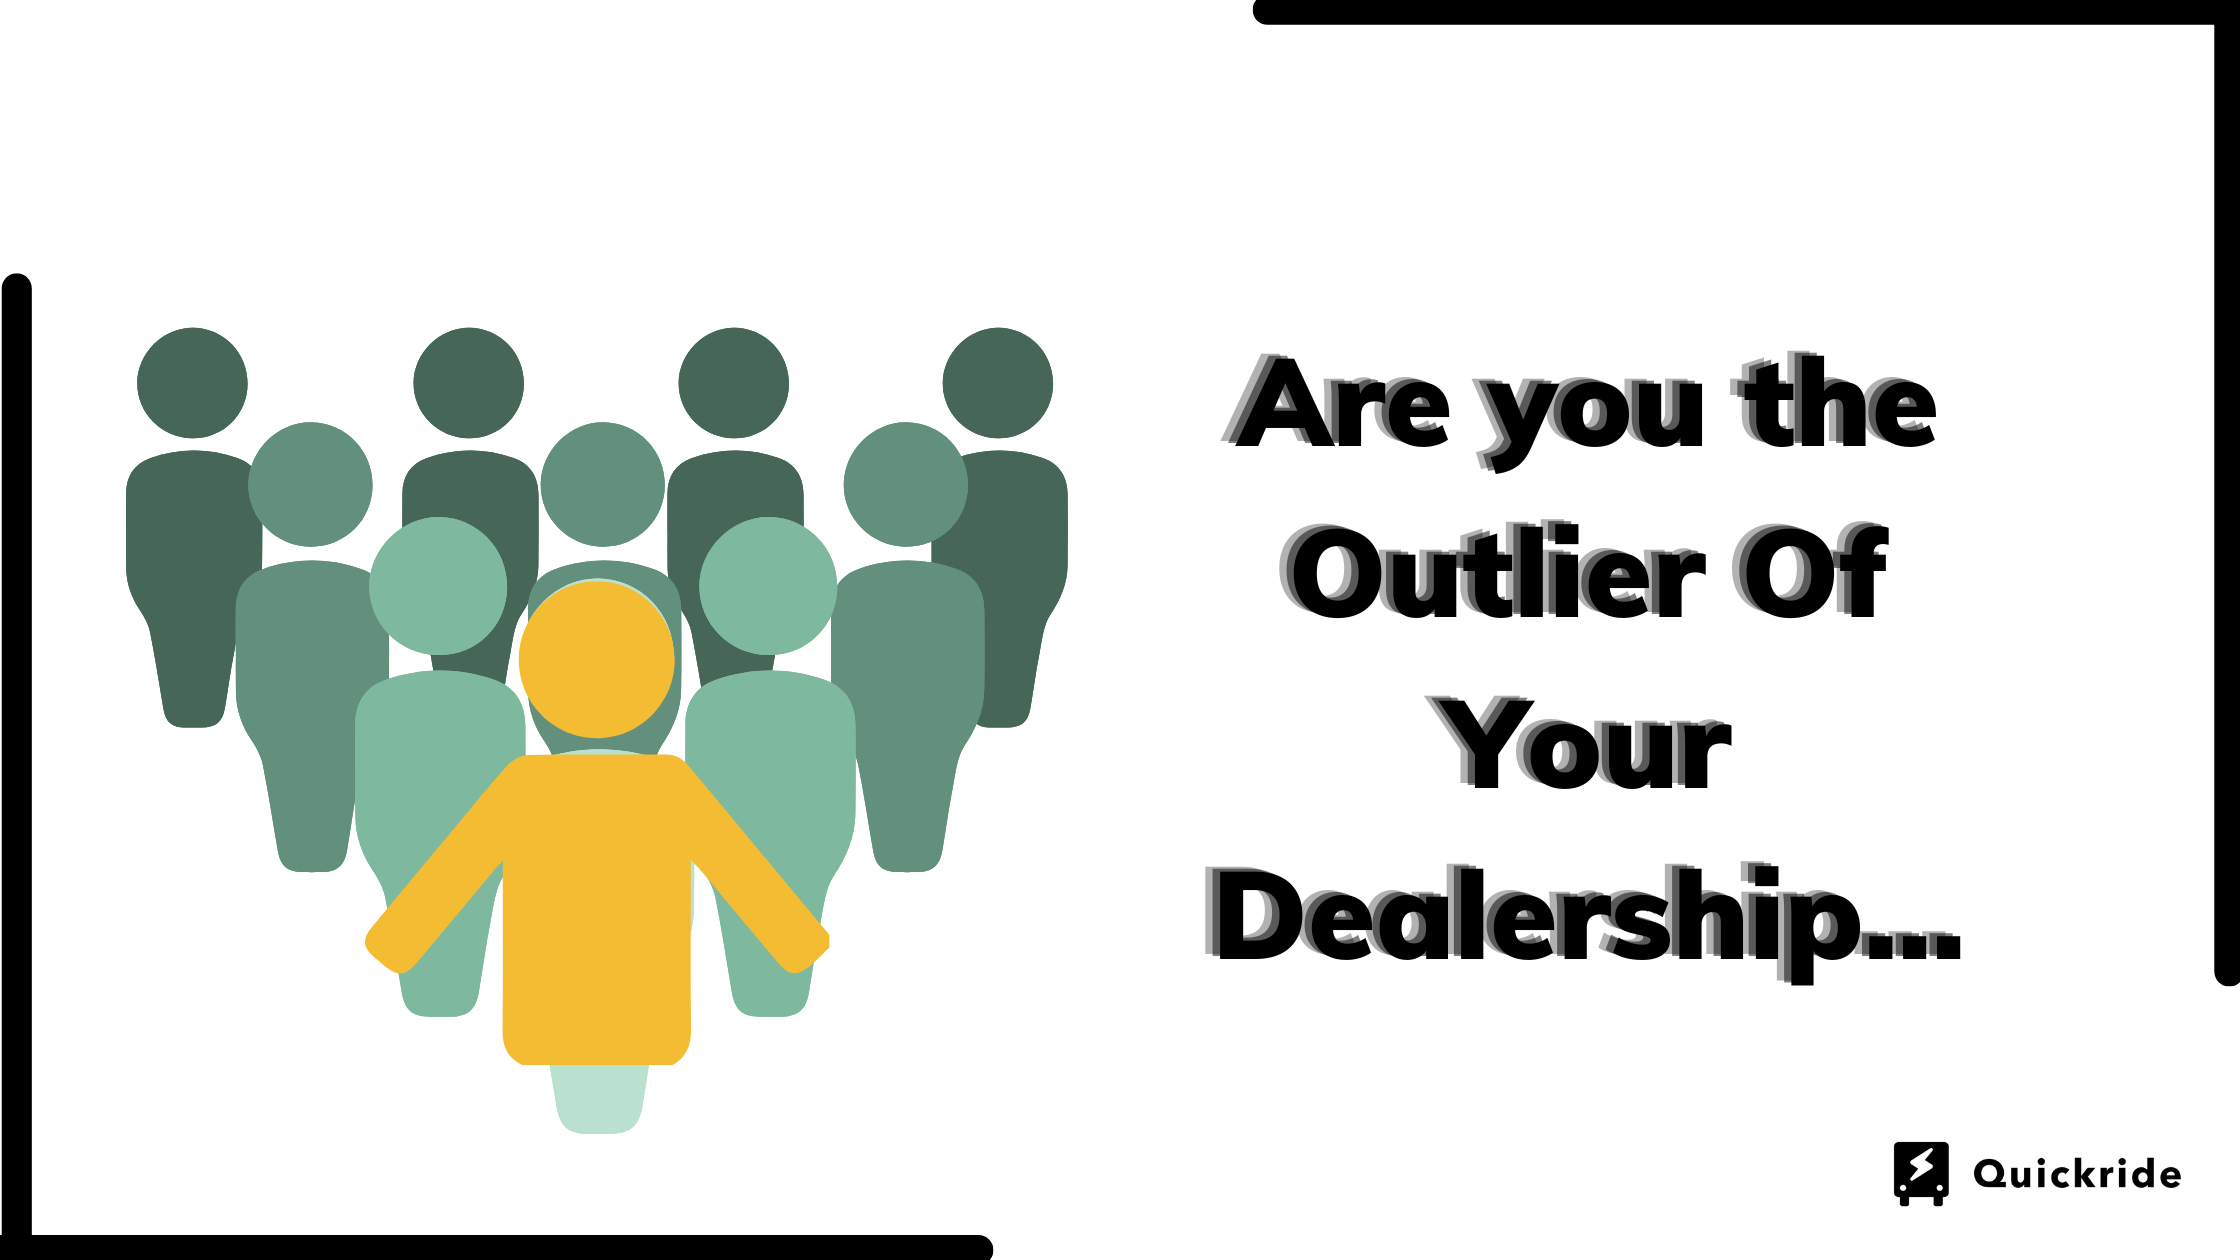 Are you the Outlier Of Your Dealership...